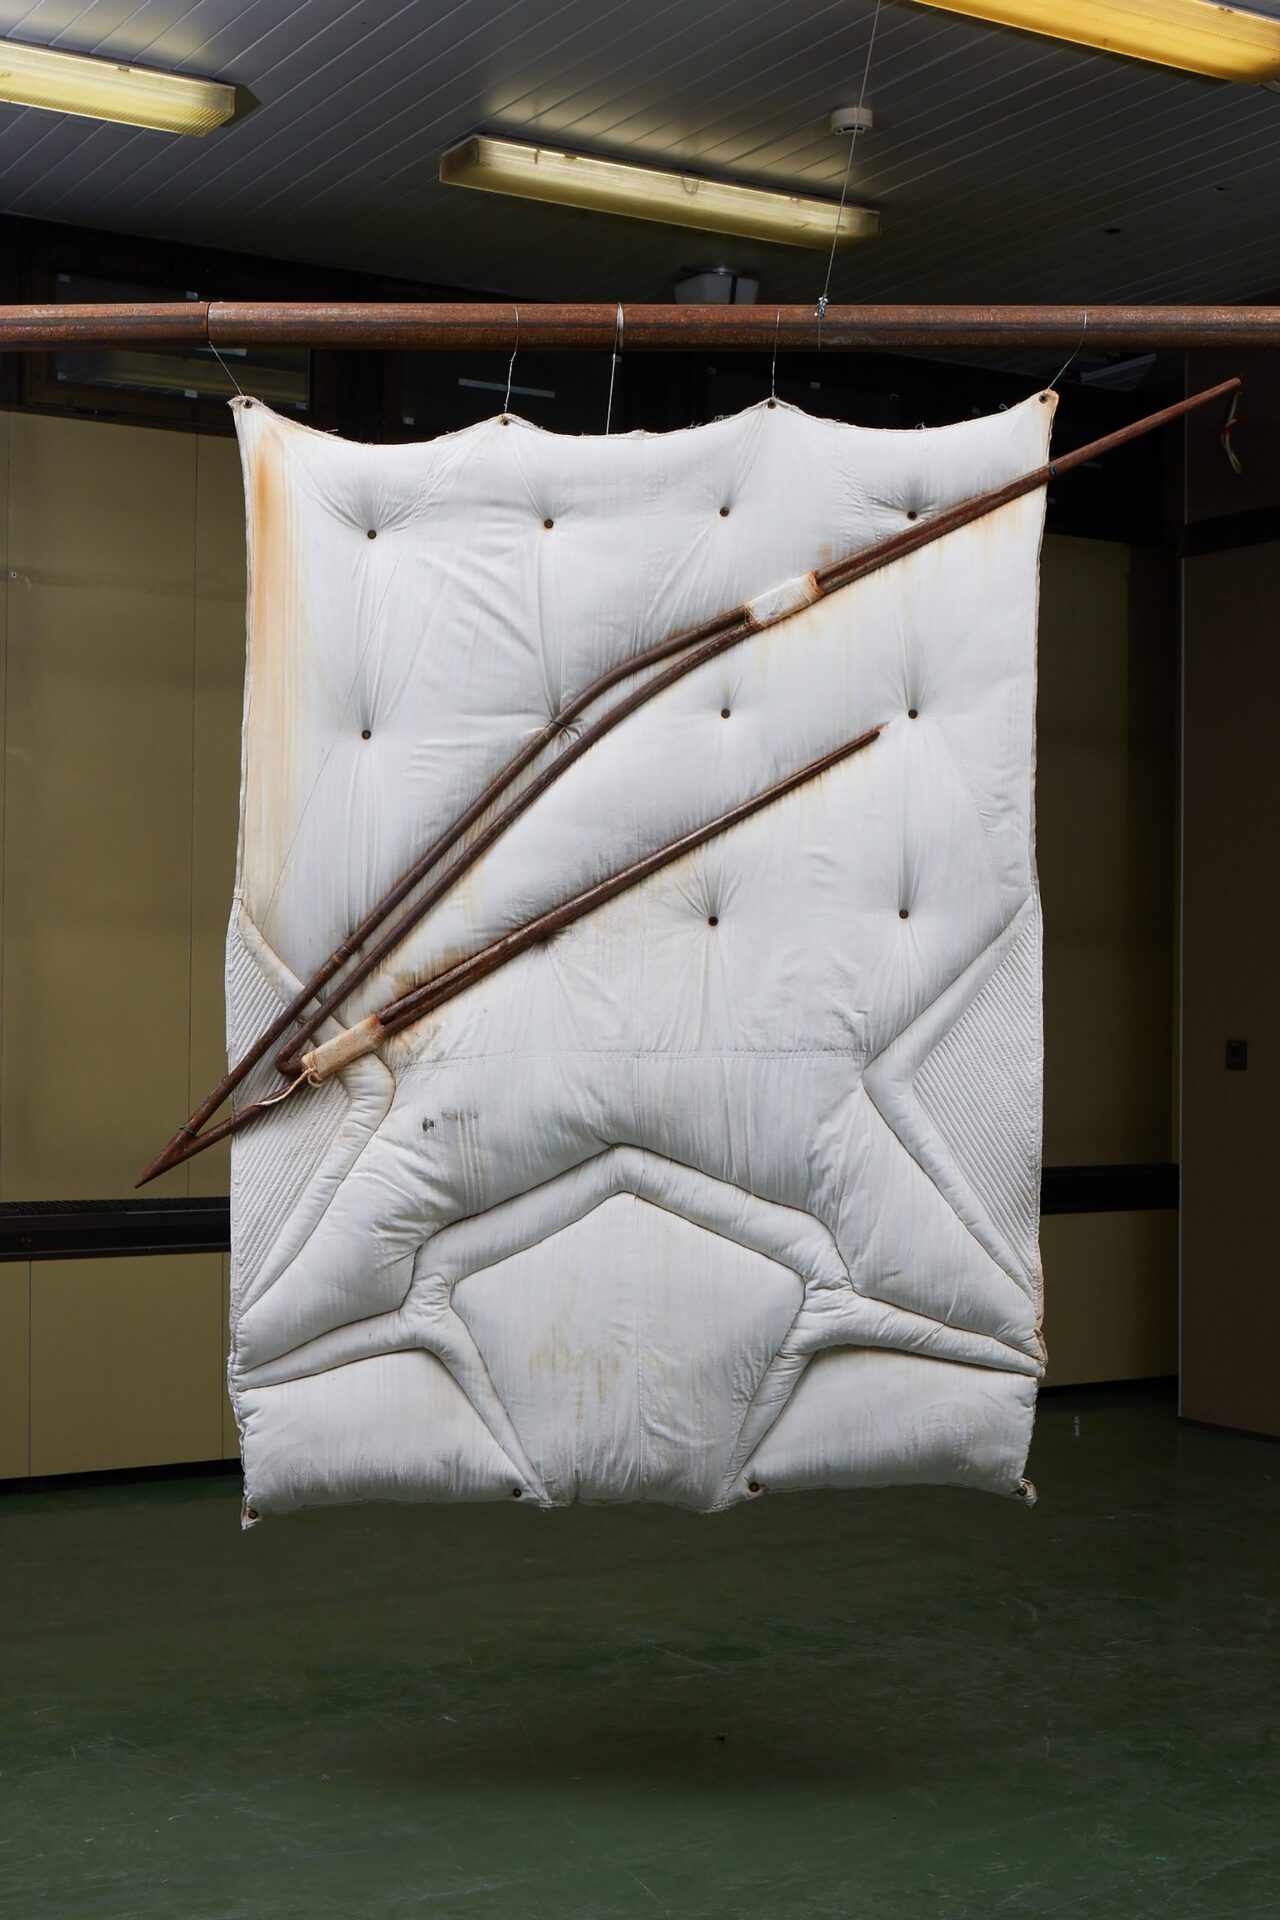 Adrian Kiss, Dunyha Rail, 2020, Metal structure, dry flower and plastic bag on  quilted linen, 200 × 150 cm